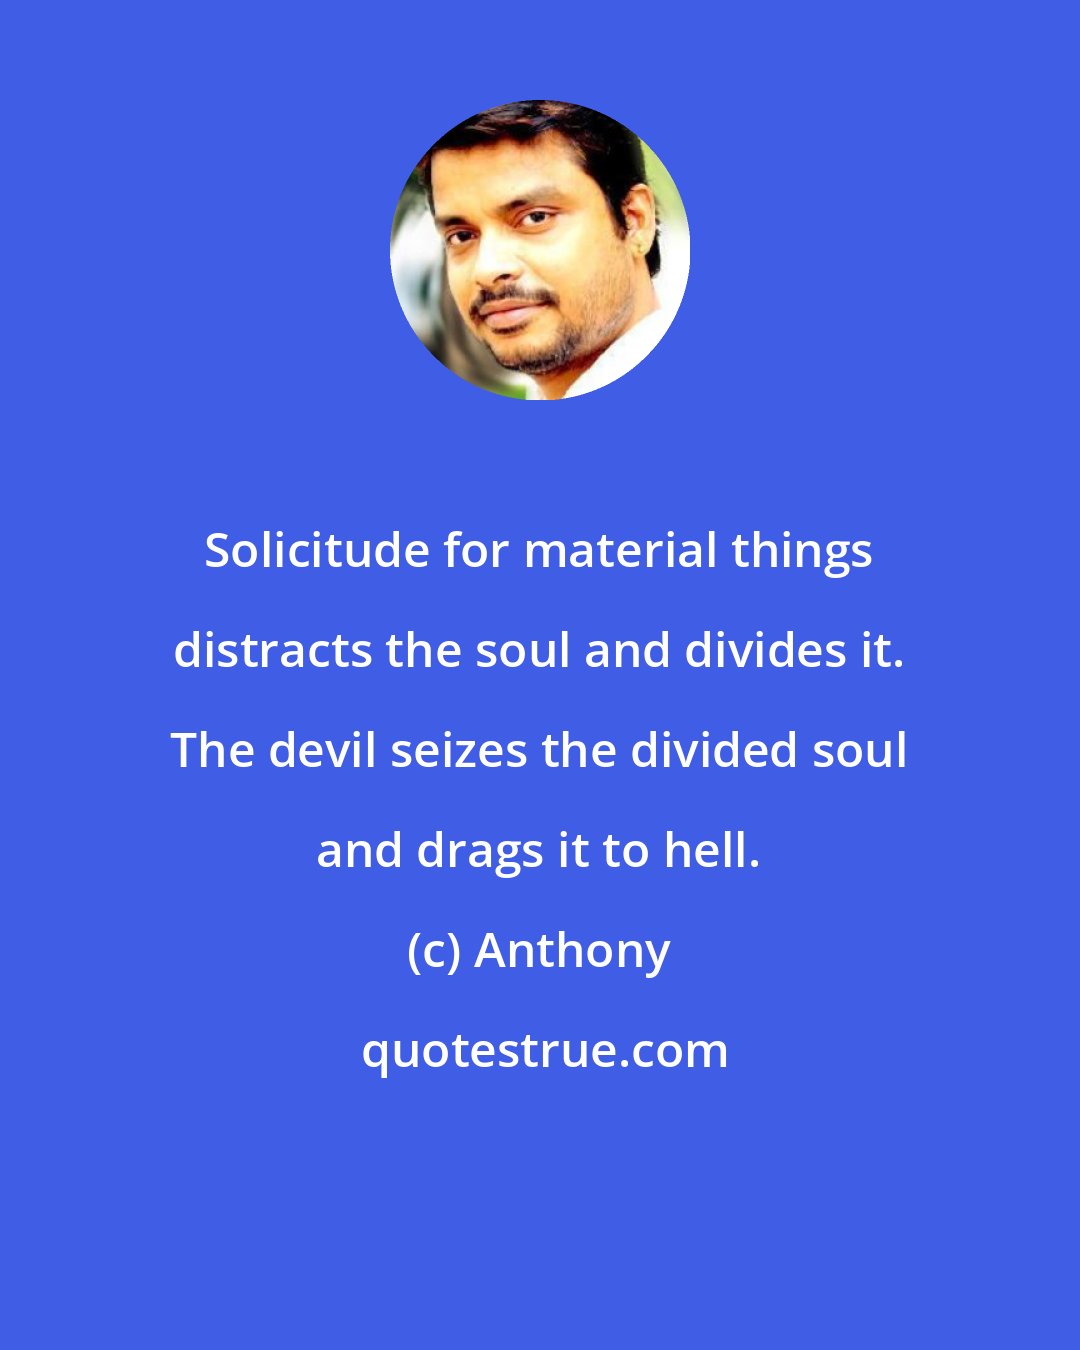 Anthony: Solicitude for material things distracts the soul and divides it. The devil seizes the divided soul and drags it to hell.